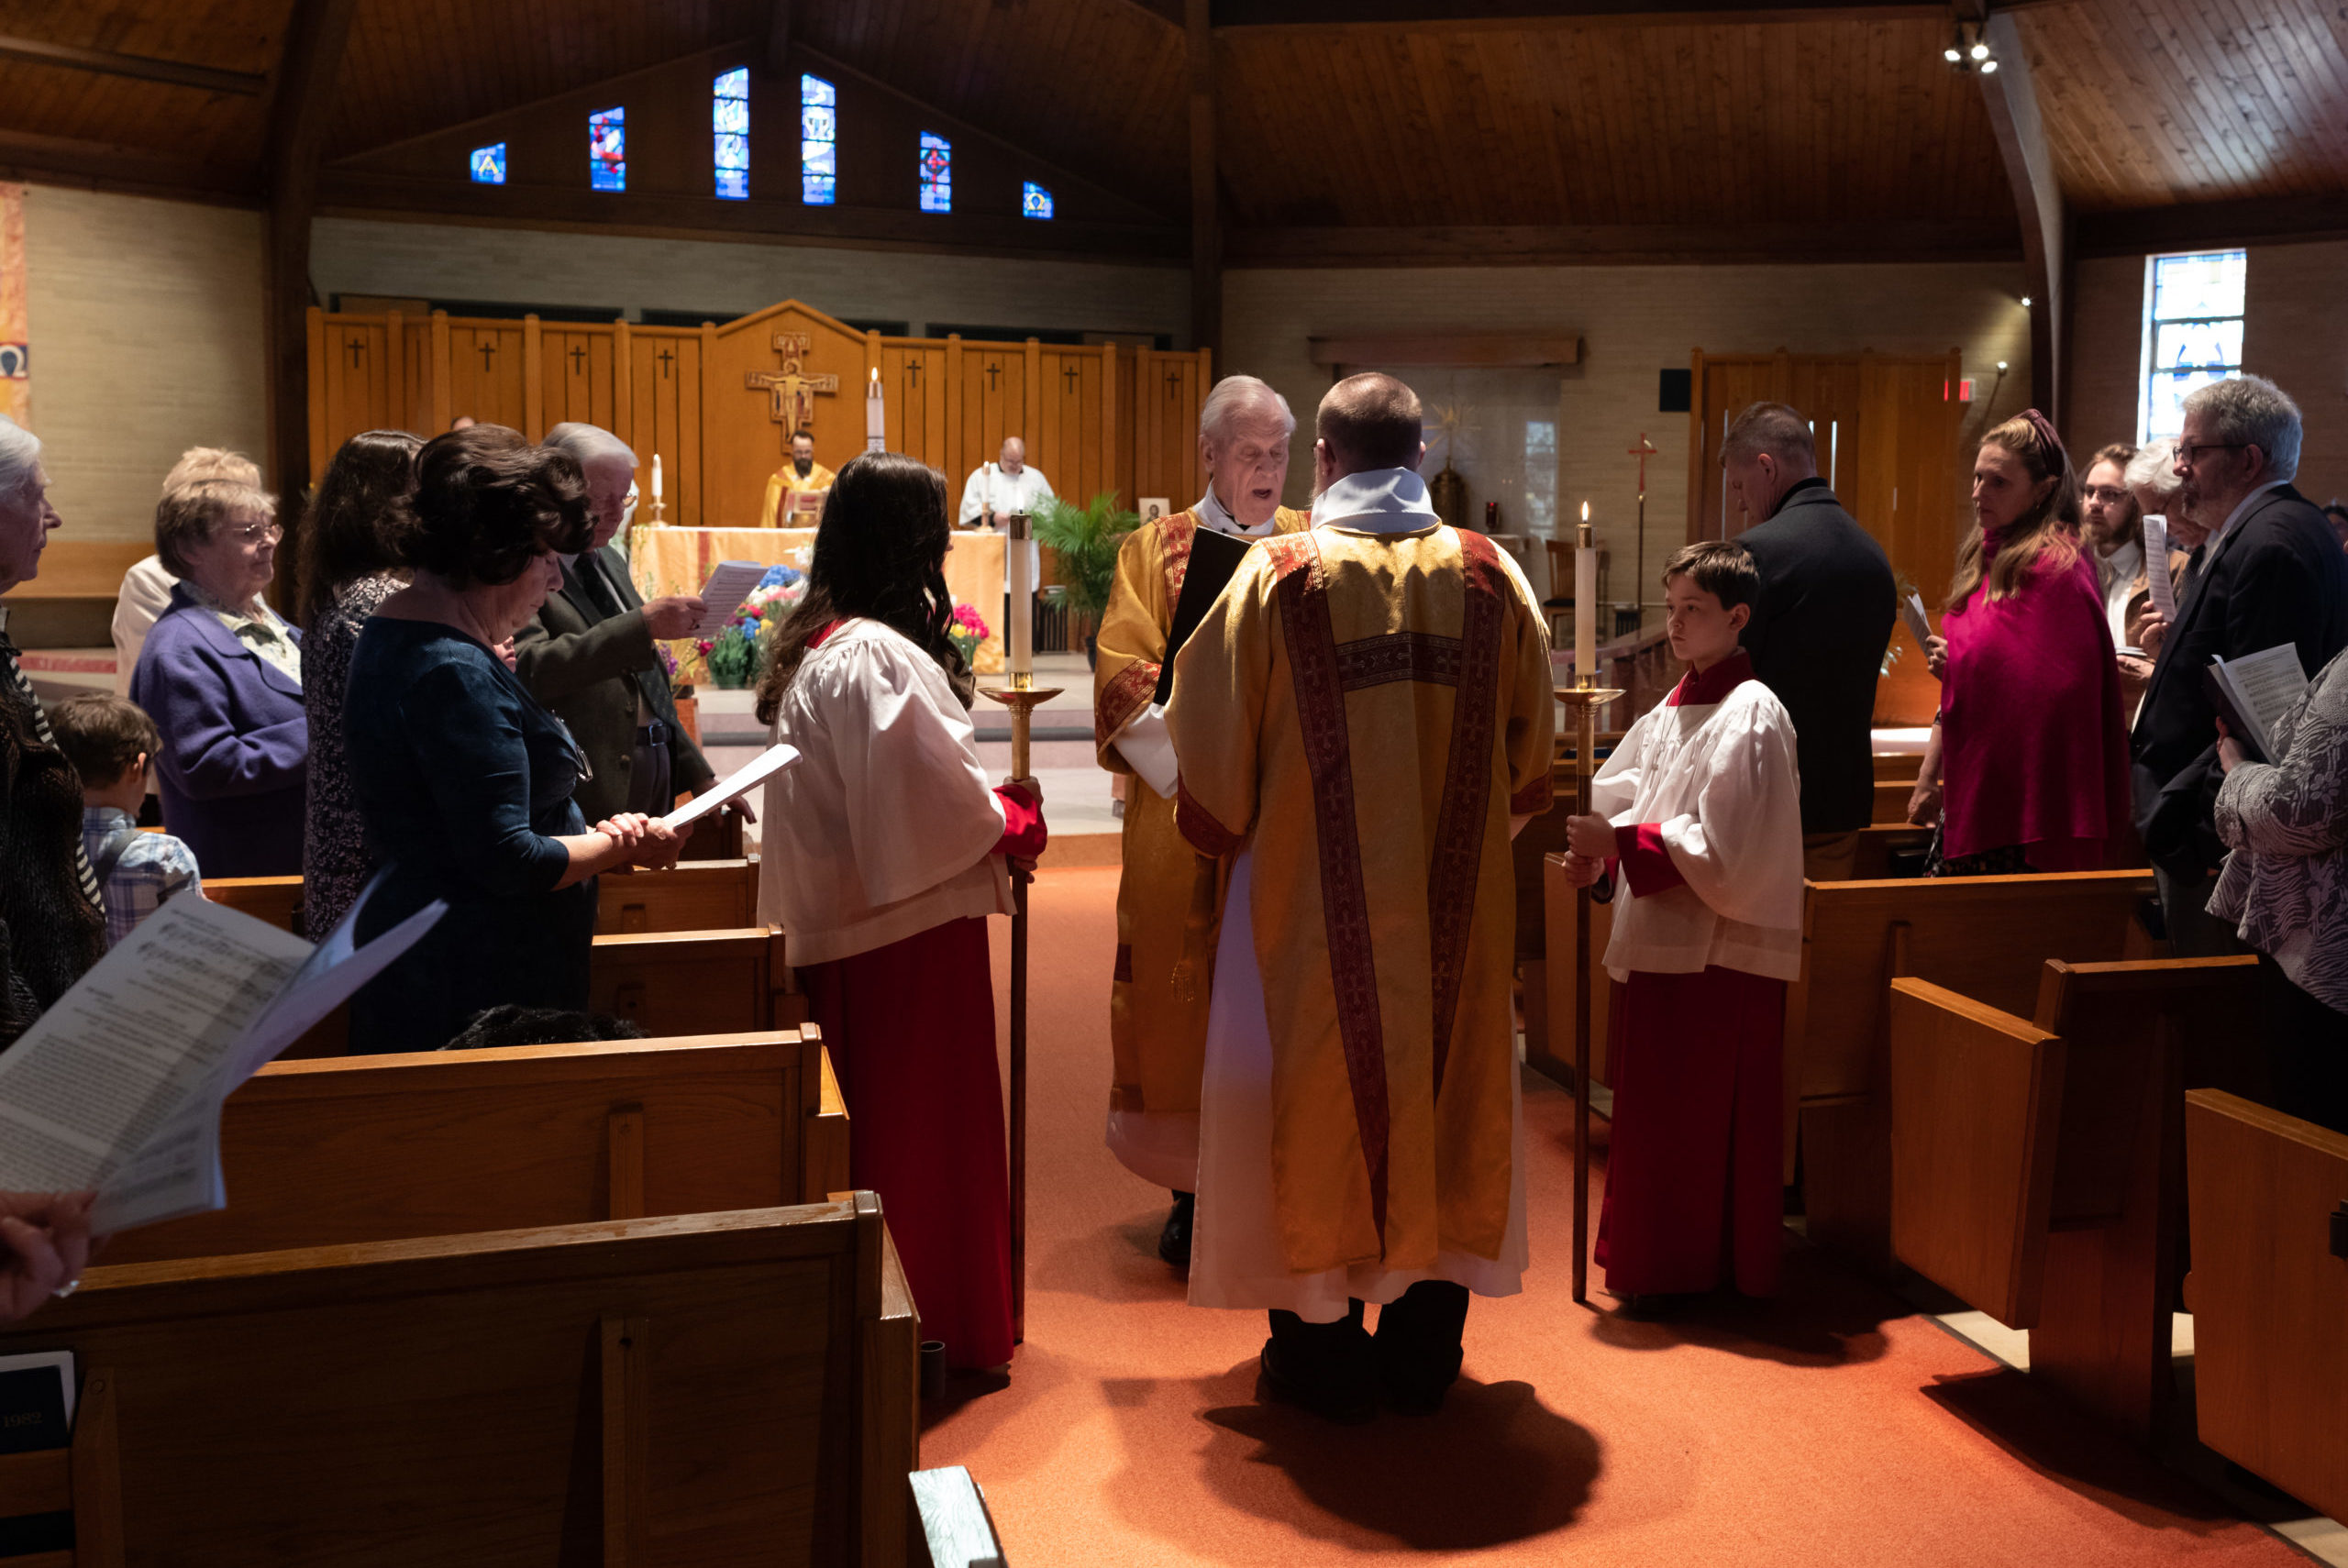 Father Malcom Reid reading the gospel in procession with acolytes